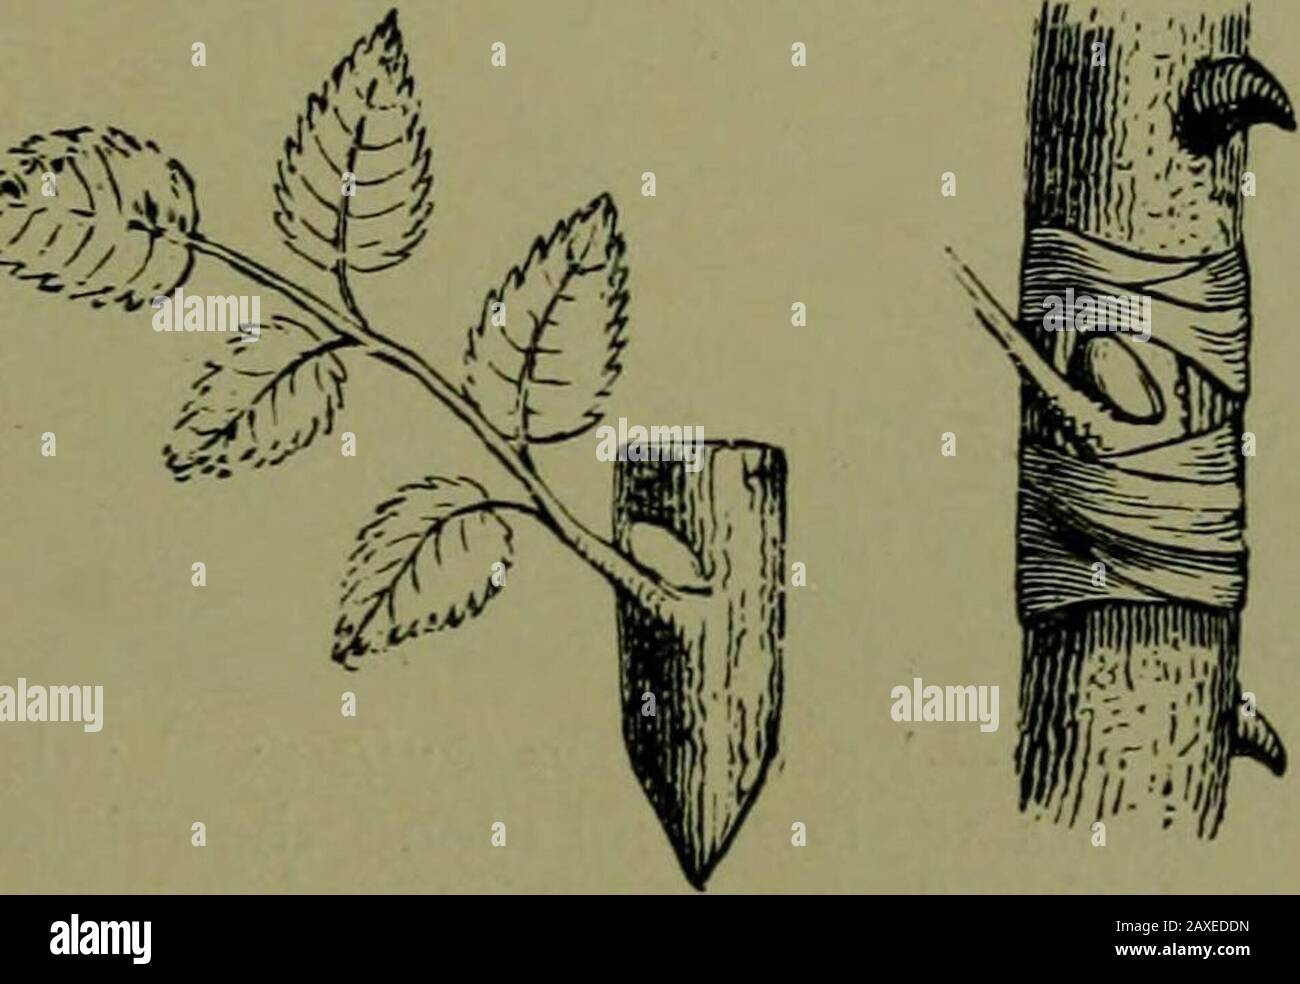 Plants and their ways in South Africa . Fig. 109.—Grafting; d, the stock to which the graft is attached. Thevarious elements in the process of budding. (From Thom^ and BennettsStructural and Physiological Botany.) Vegetative reproduction is sure and economical, a disad-vantage arises from the close crowding of new plants. 122 Plants and their Ways in South Africa Grafting and Budding.—When plants are grown fromseeds they often differ from the parent plant, owing to the factthat the ovules have been cross fertilized, i.e. pollen has beenbrought from another variety or species. Grafting is resor Stock Photo